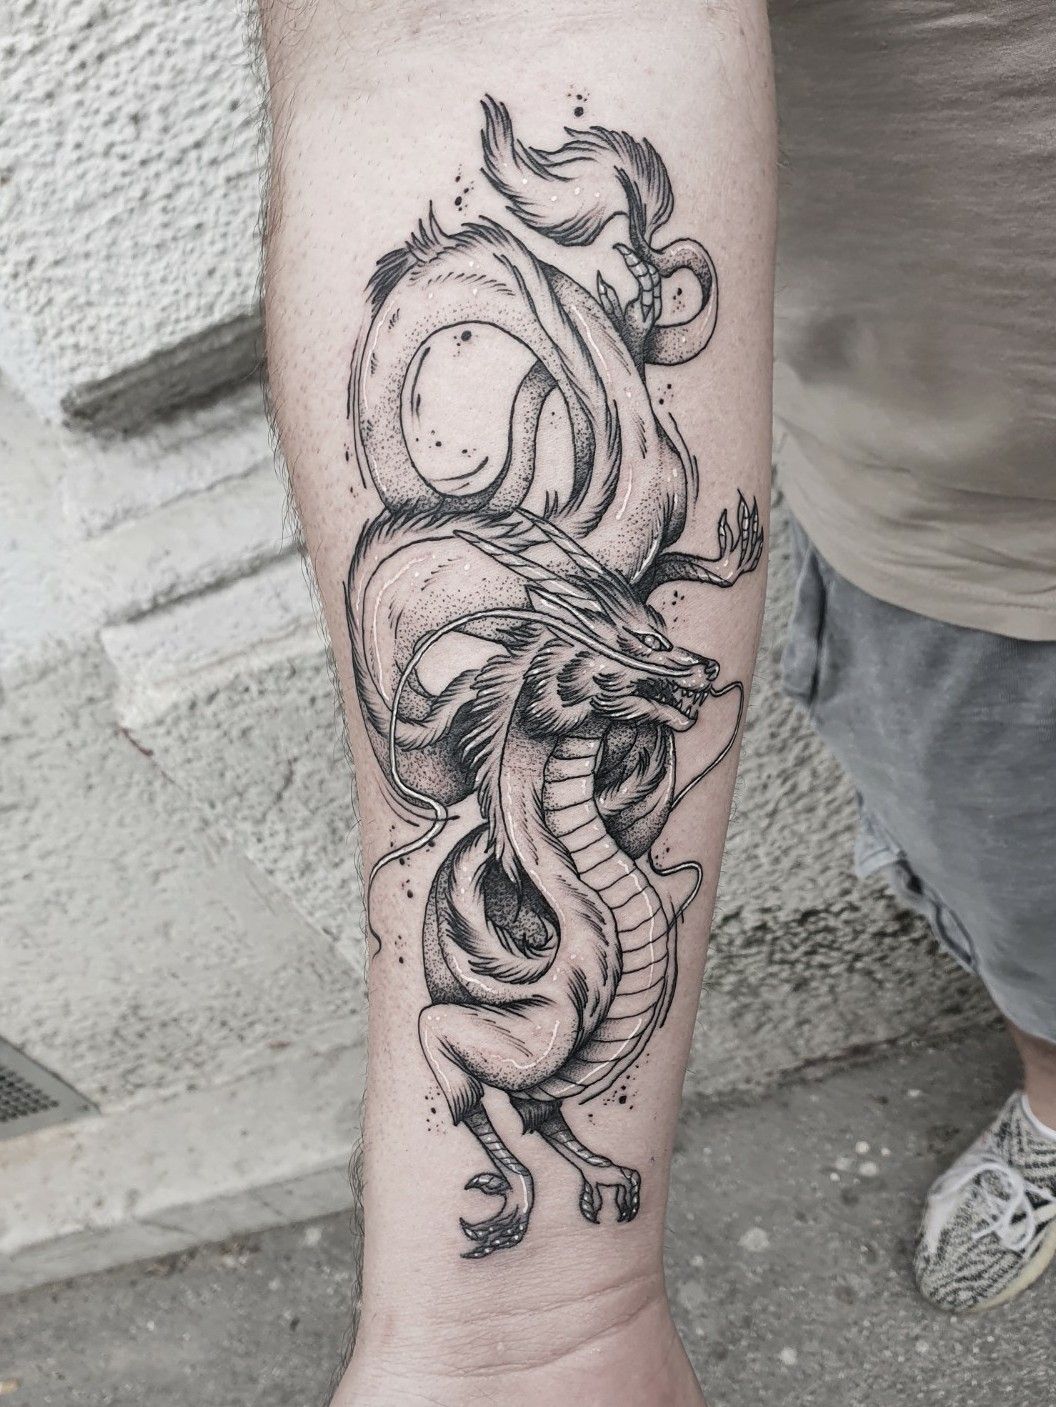 Heather Bradley Tattoo Artist  Hungarian Horntail  thanks so much  Meaghen for letting me do this one I fucking love Harry Potter    Facebook